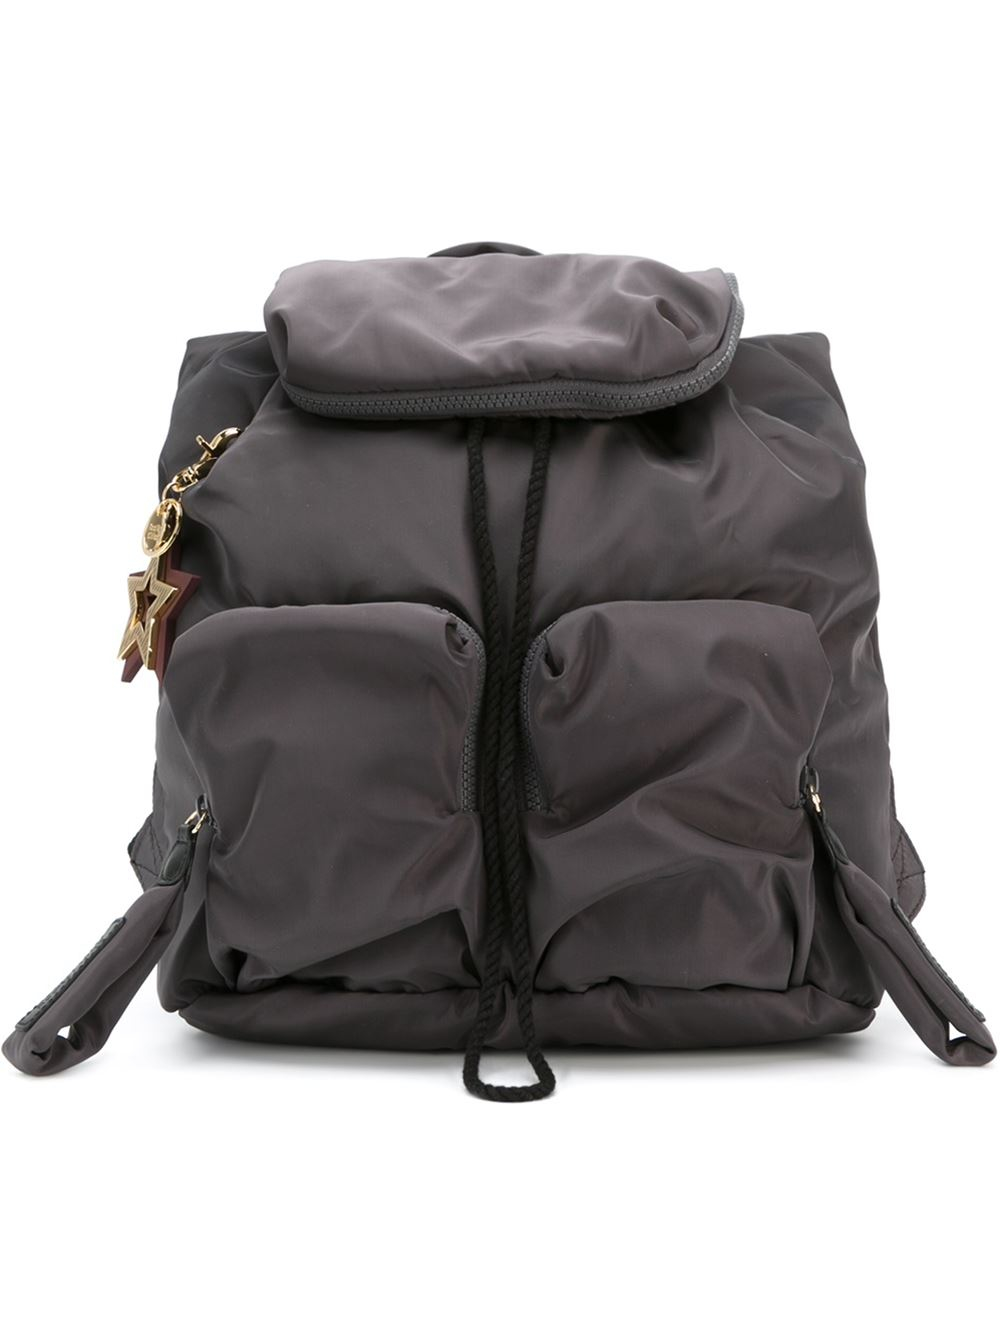 Lyst - See By Chloé 'joy Rider' Backpack in Gray